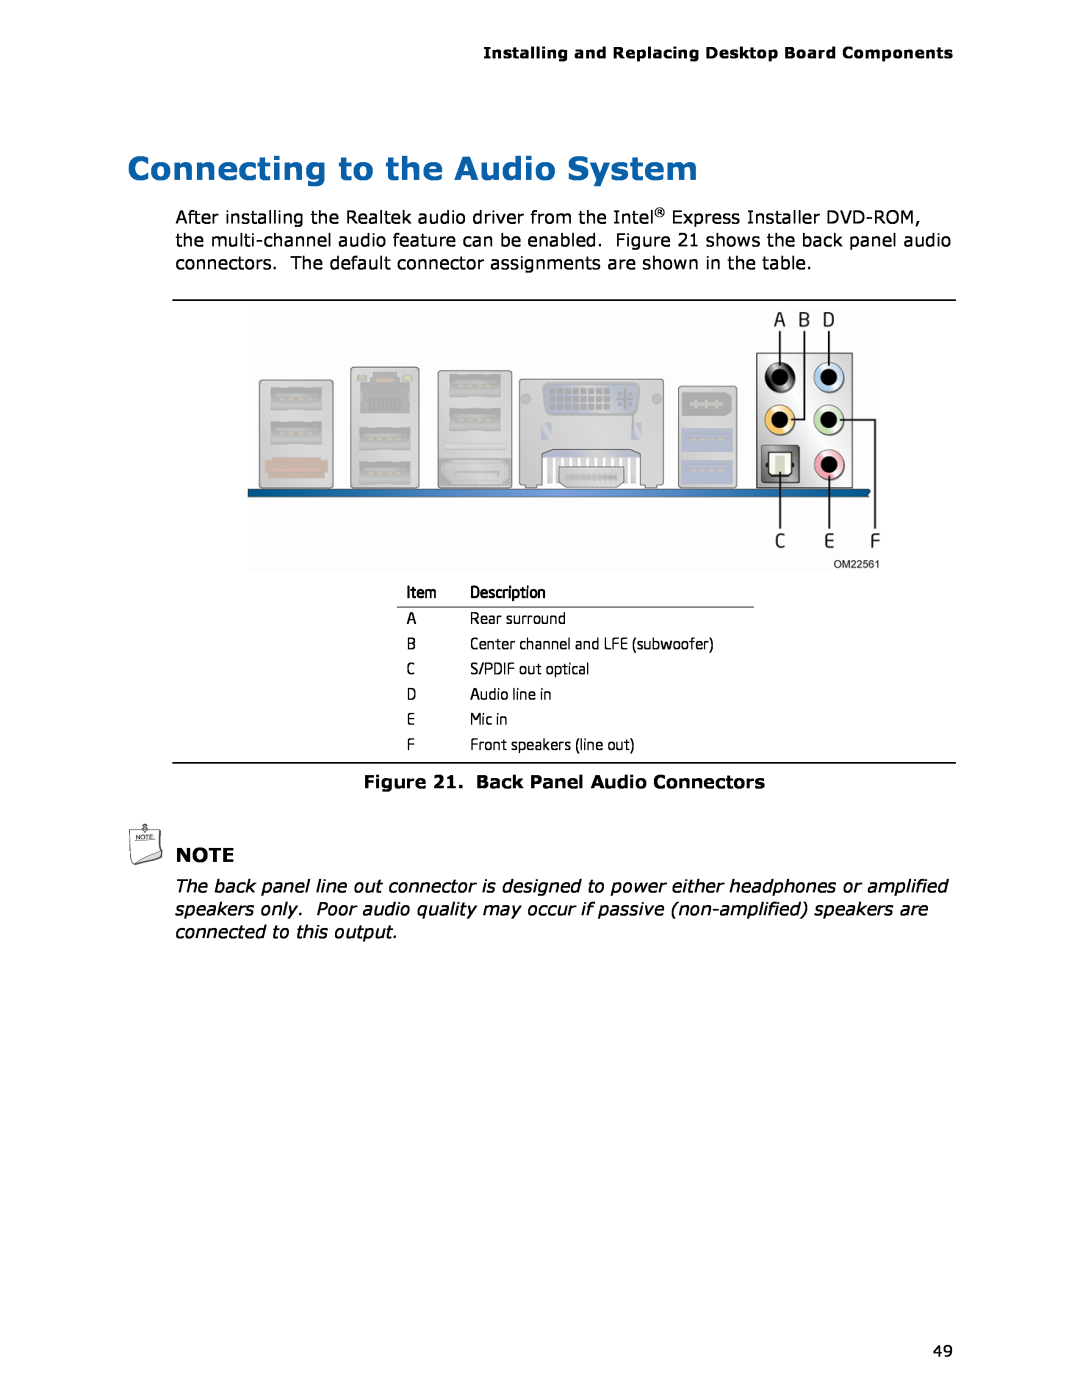 Intel BLKDH67GDB3, G13841-001 manual Connecting to the Audio System, Back Panel Audio Connectors 